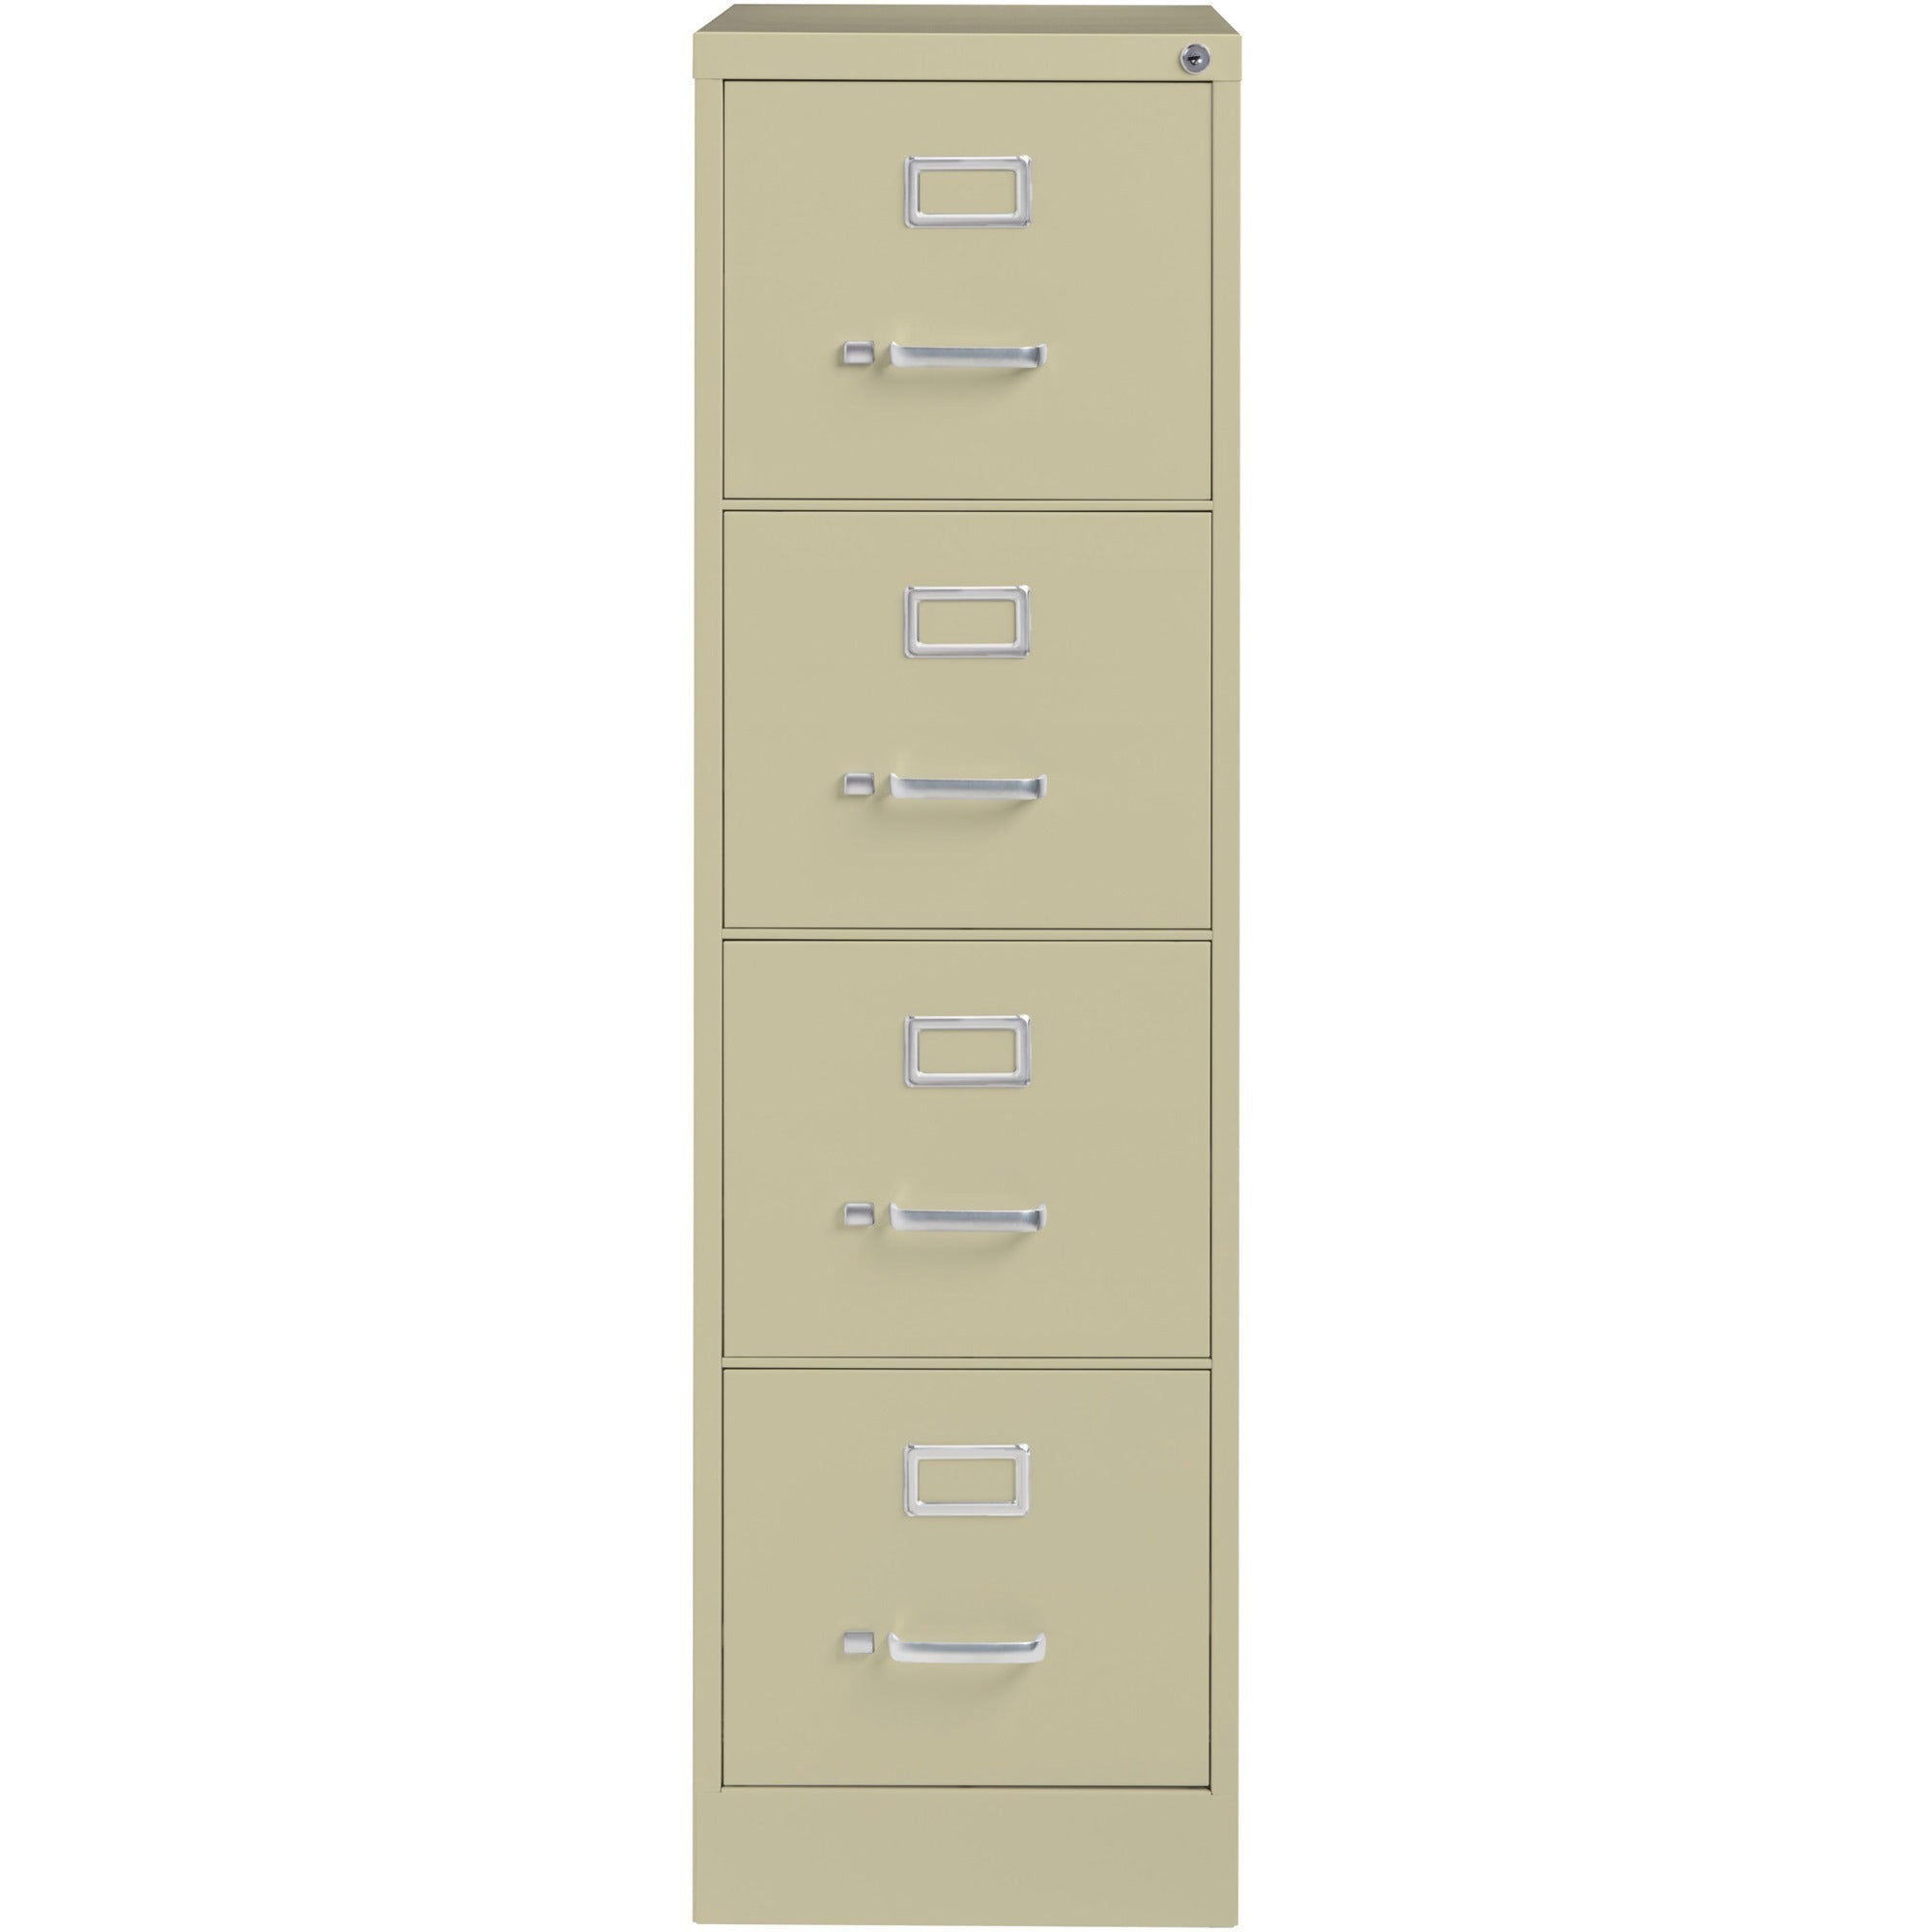 Lorell Fortress Series 22" Commercial-Grade Vertical File Cabinet - 15" x 22" x 52" - 4 x Drawer(s) for File - Letter - Lockable, Ball-bearing Suspension - Putty - Steel - Recycled - 